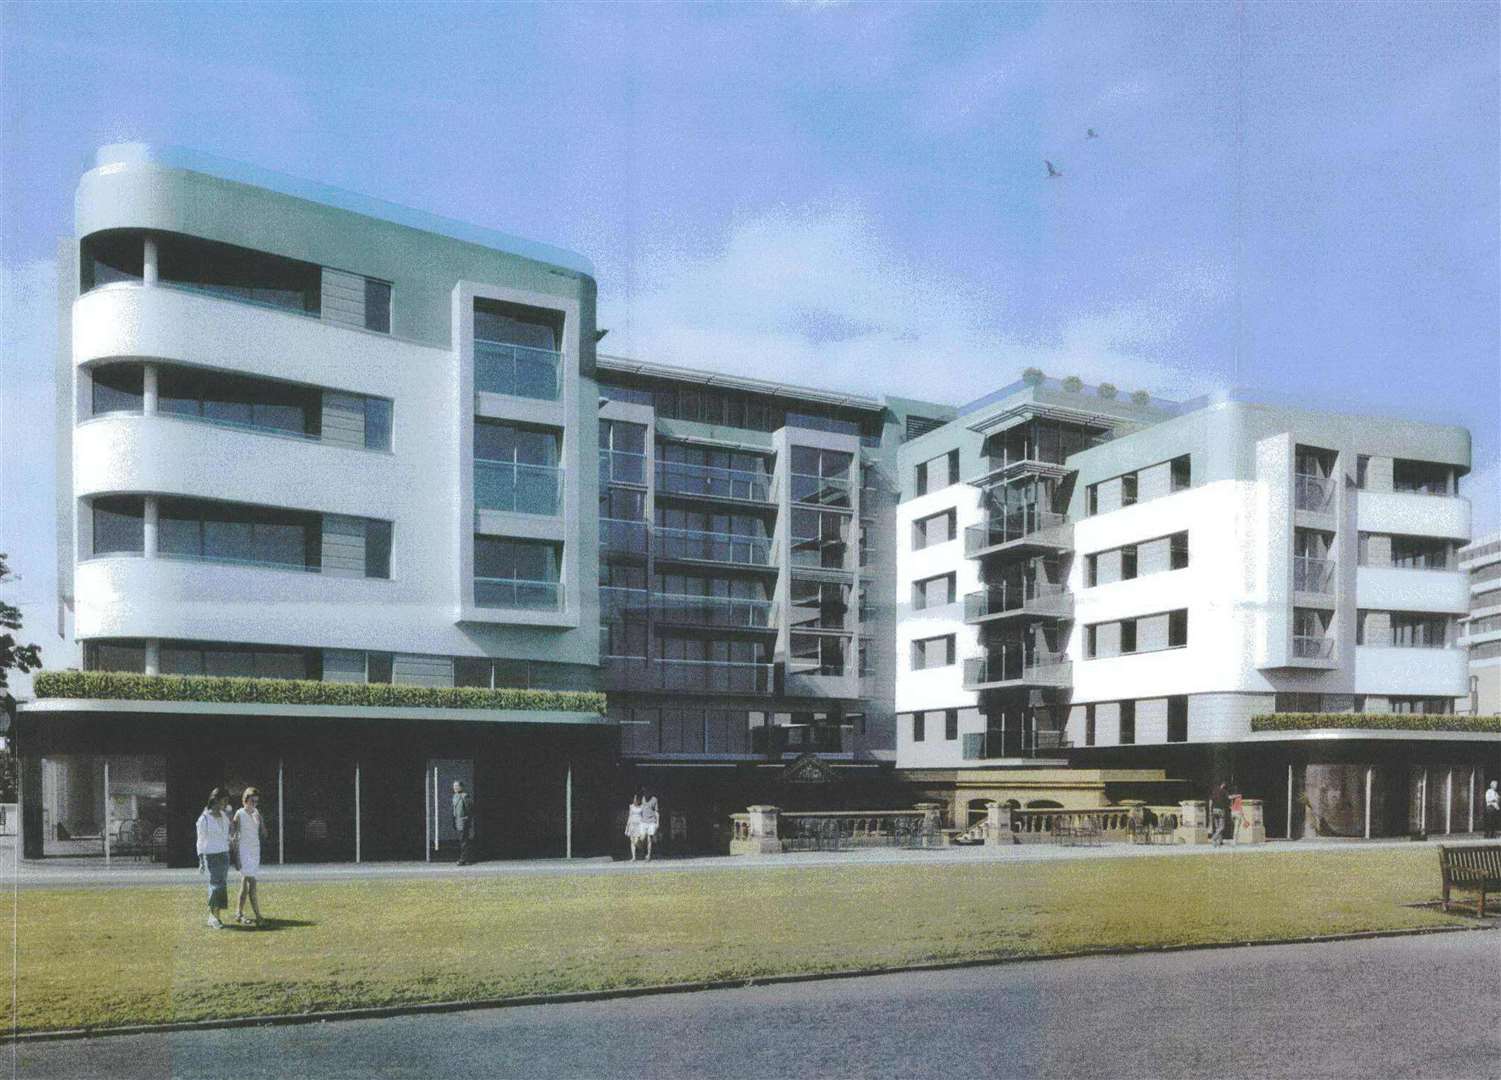 A computer-generated image of the proposed development